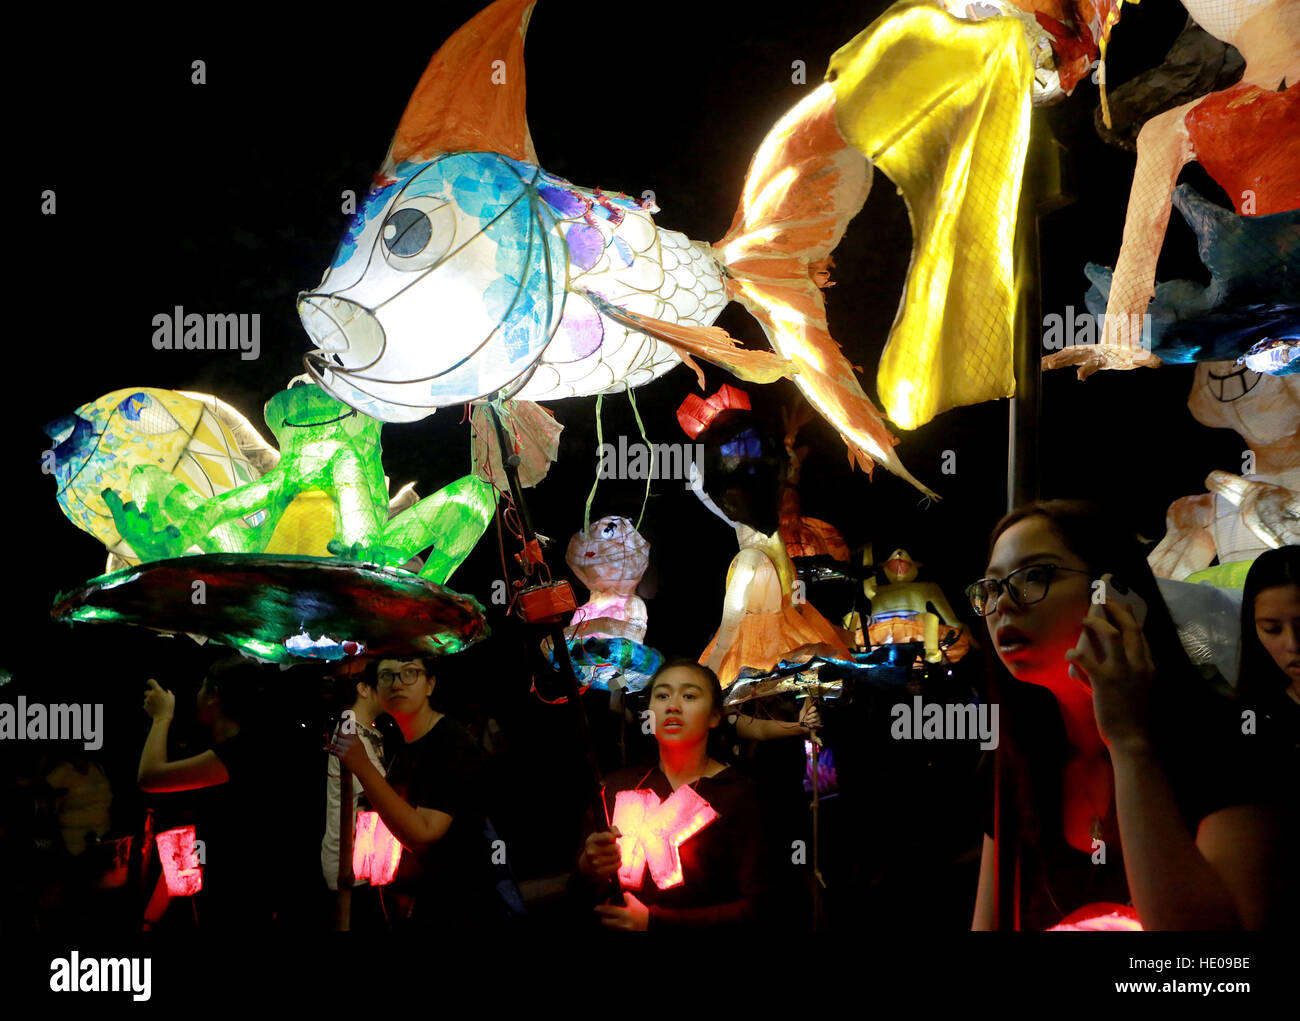 Quezon City, Philippines. 16th Dec, 2016. Students march with colorful lanterns during the annual Lantern Parade at the University of the Philippines in Quezon City, the Philippines, Dec. 16, 2016. The annual Lantern Parade showcases colorful floats, lanterns, street performances, various costumes and spectacular fireworks in celebration of the start of the Christmas break for students. © Rouelle Umali/Xinhua/Alamy Live News Stock Photo